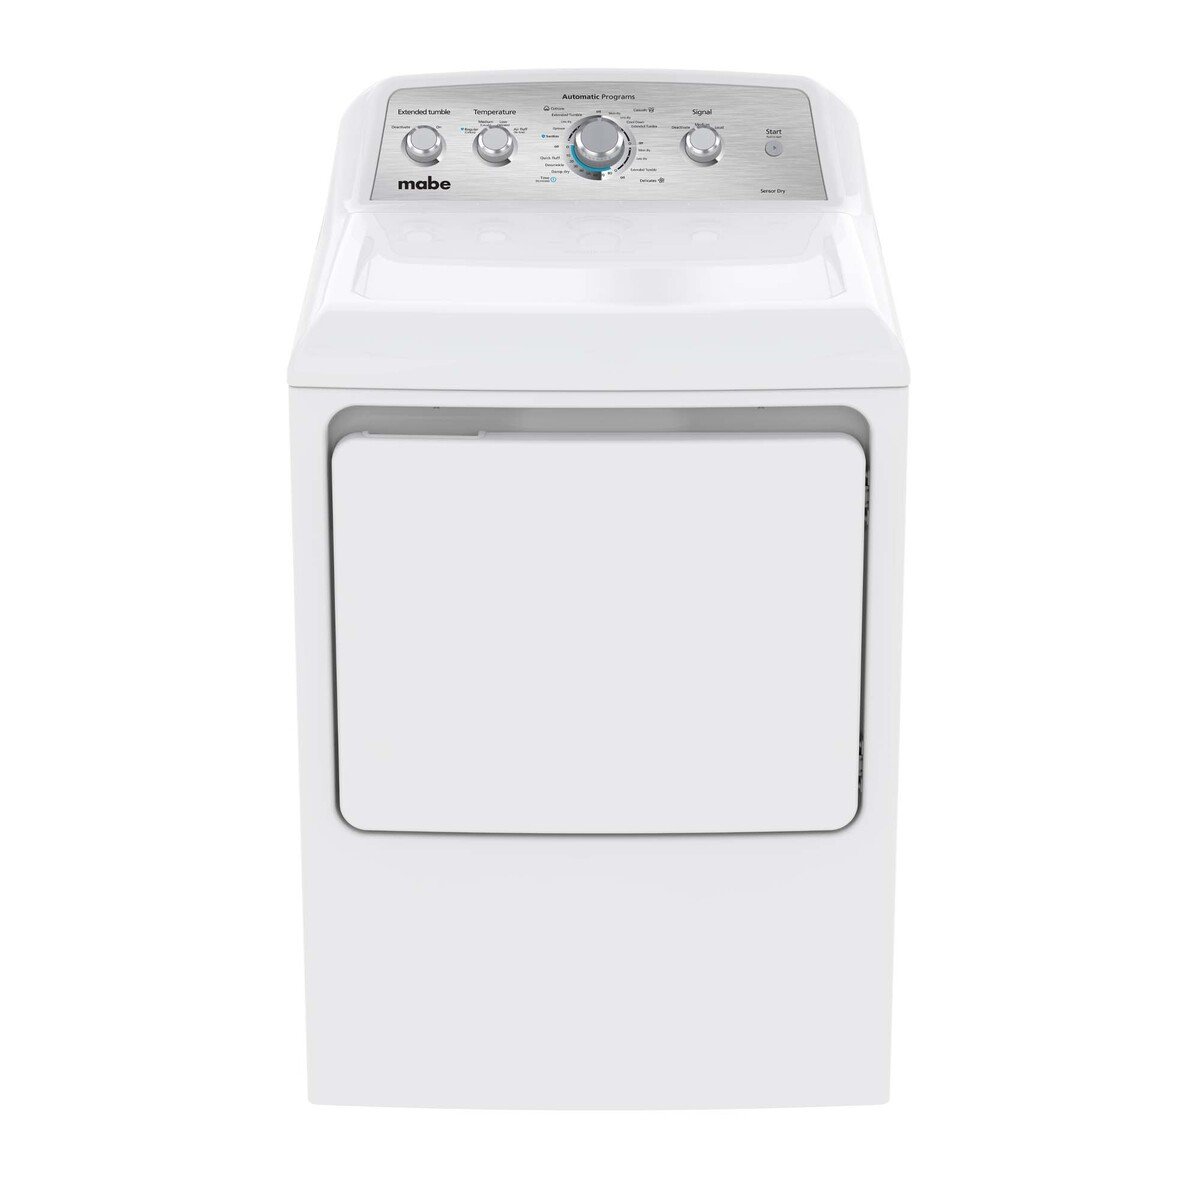 Mabe Tumble Dryer SME47N5XNBCT2 7.2Cuft.